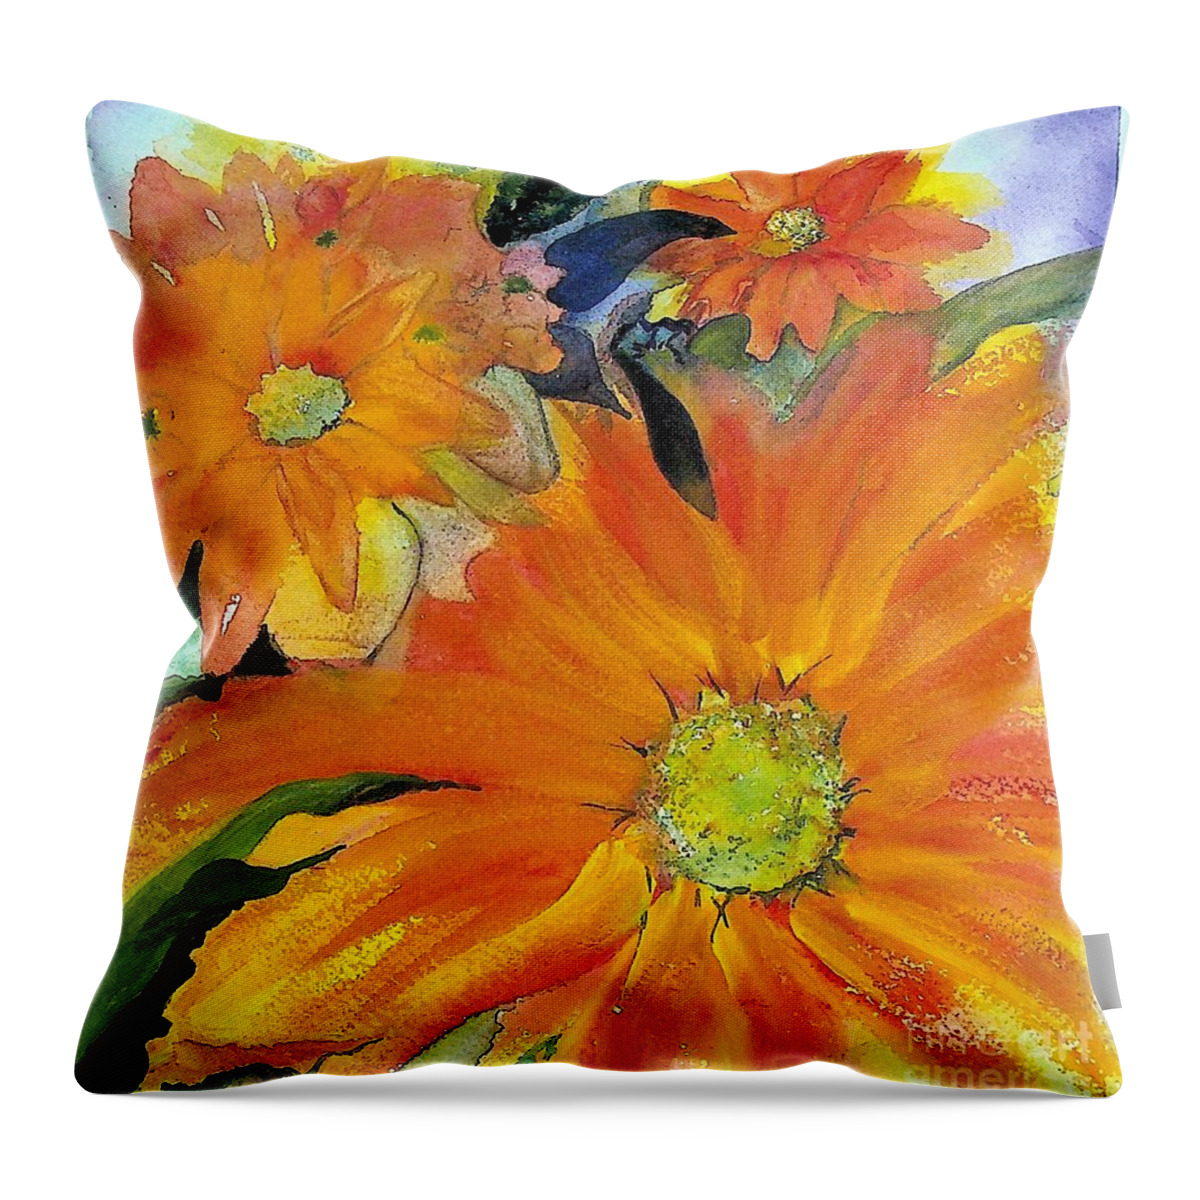 Watercolor Throw Pillow featuring the painting Orange flowers by Valerie Shaffer